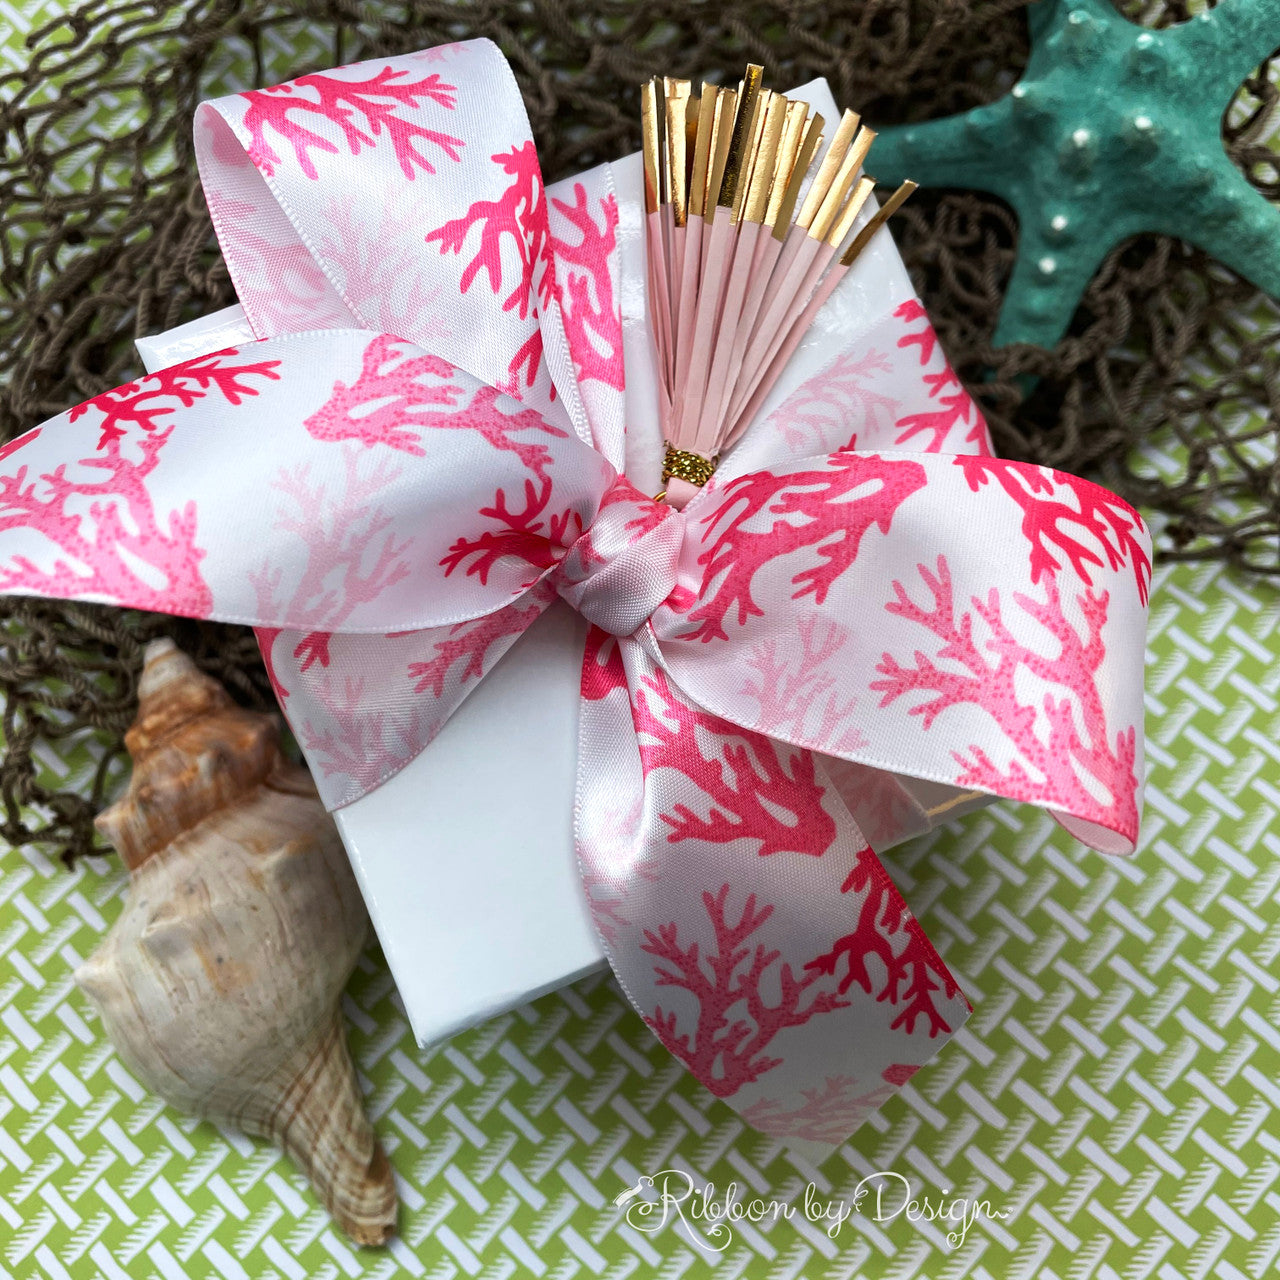 Our  pink coral reef ribbon makes such a pretty bow for this tropical themed party!